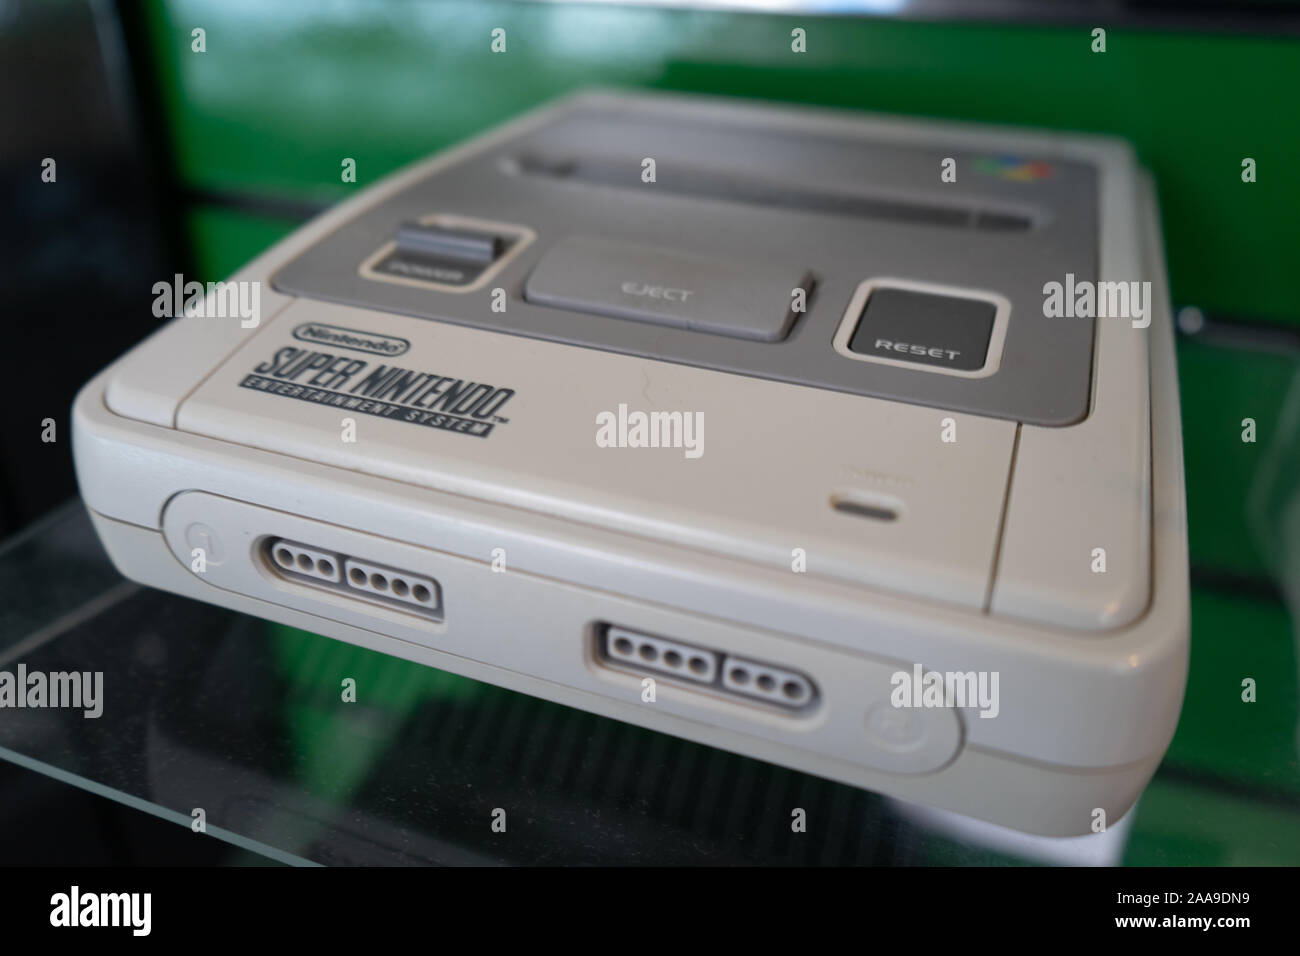 A Super Nintendo Entertainment system produces in 1991 and sold throughout the 1990's Stock Photo